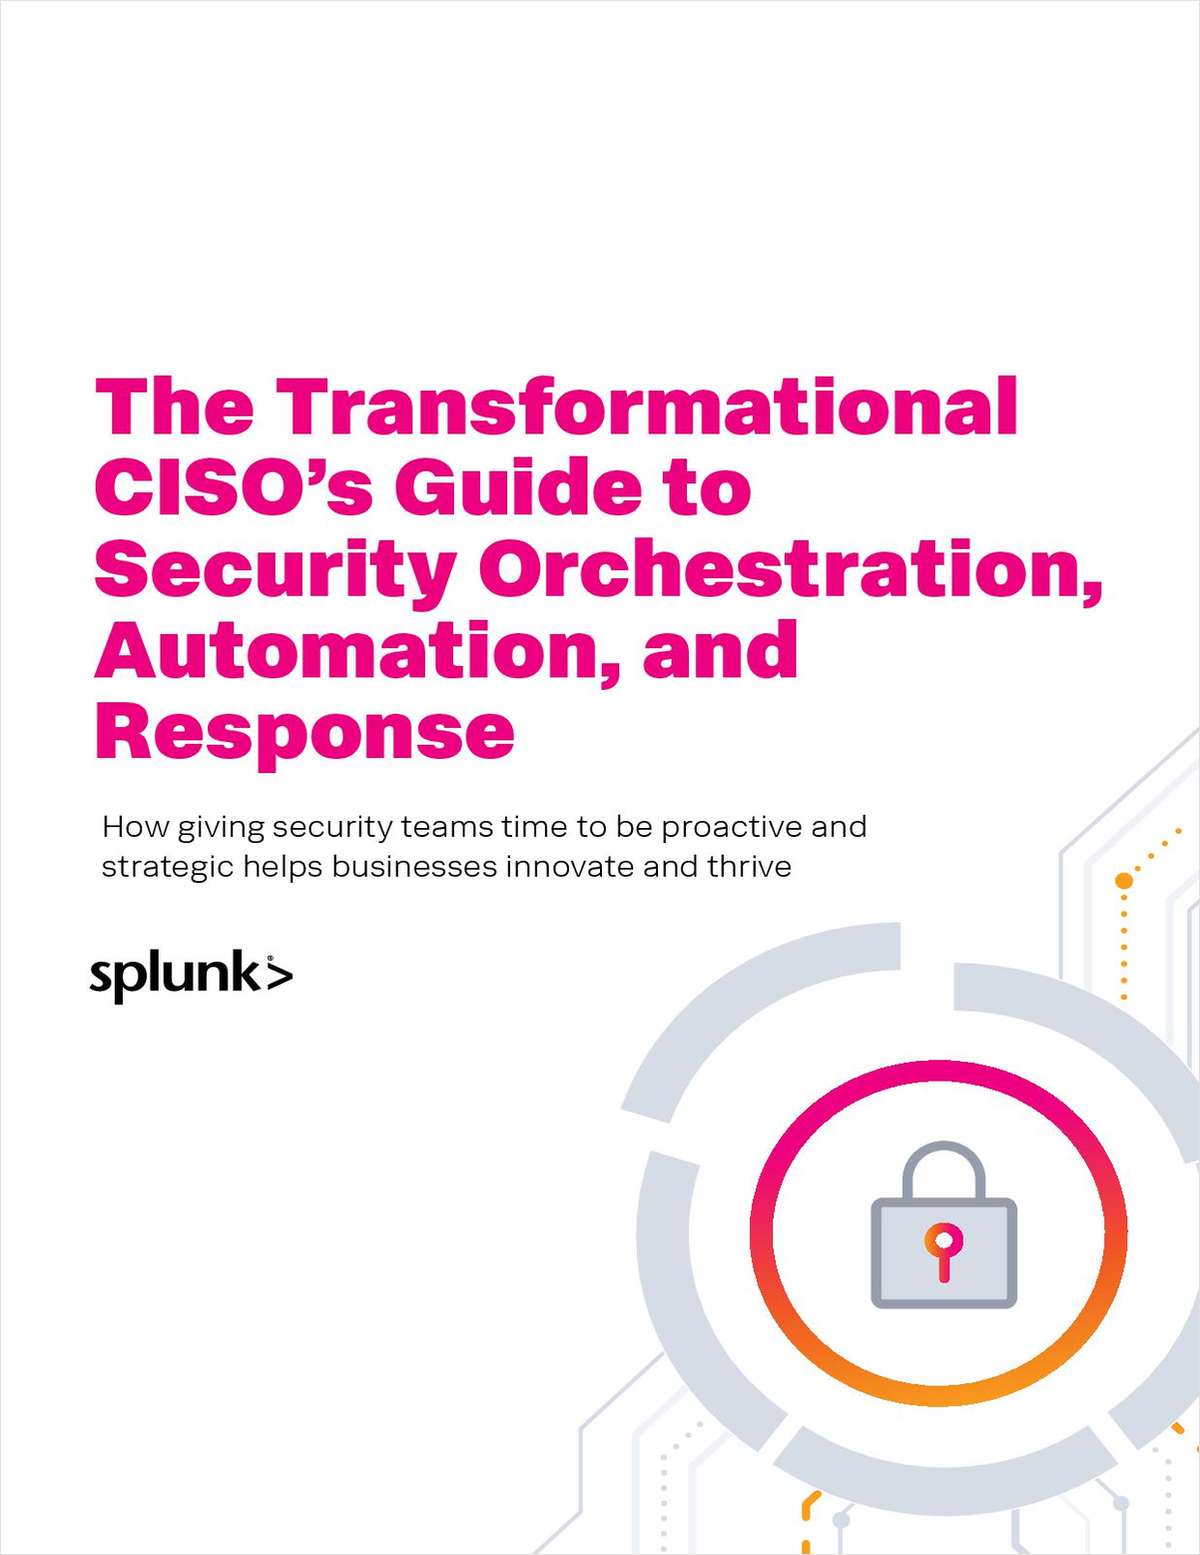 The Transformational CISO's Guide to Security, Orchestration, Automation, and Response